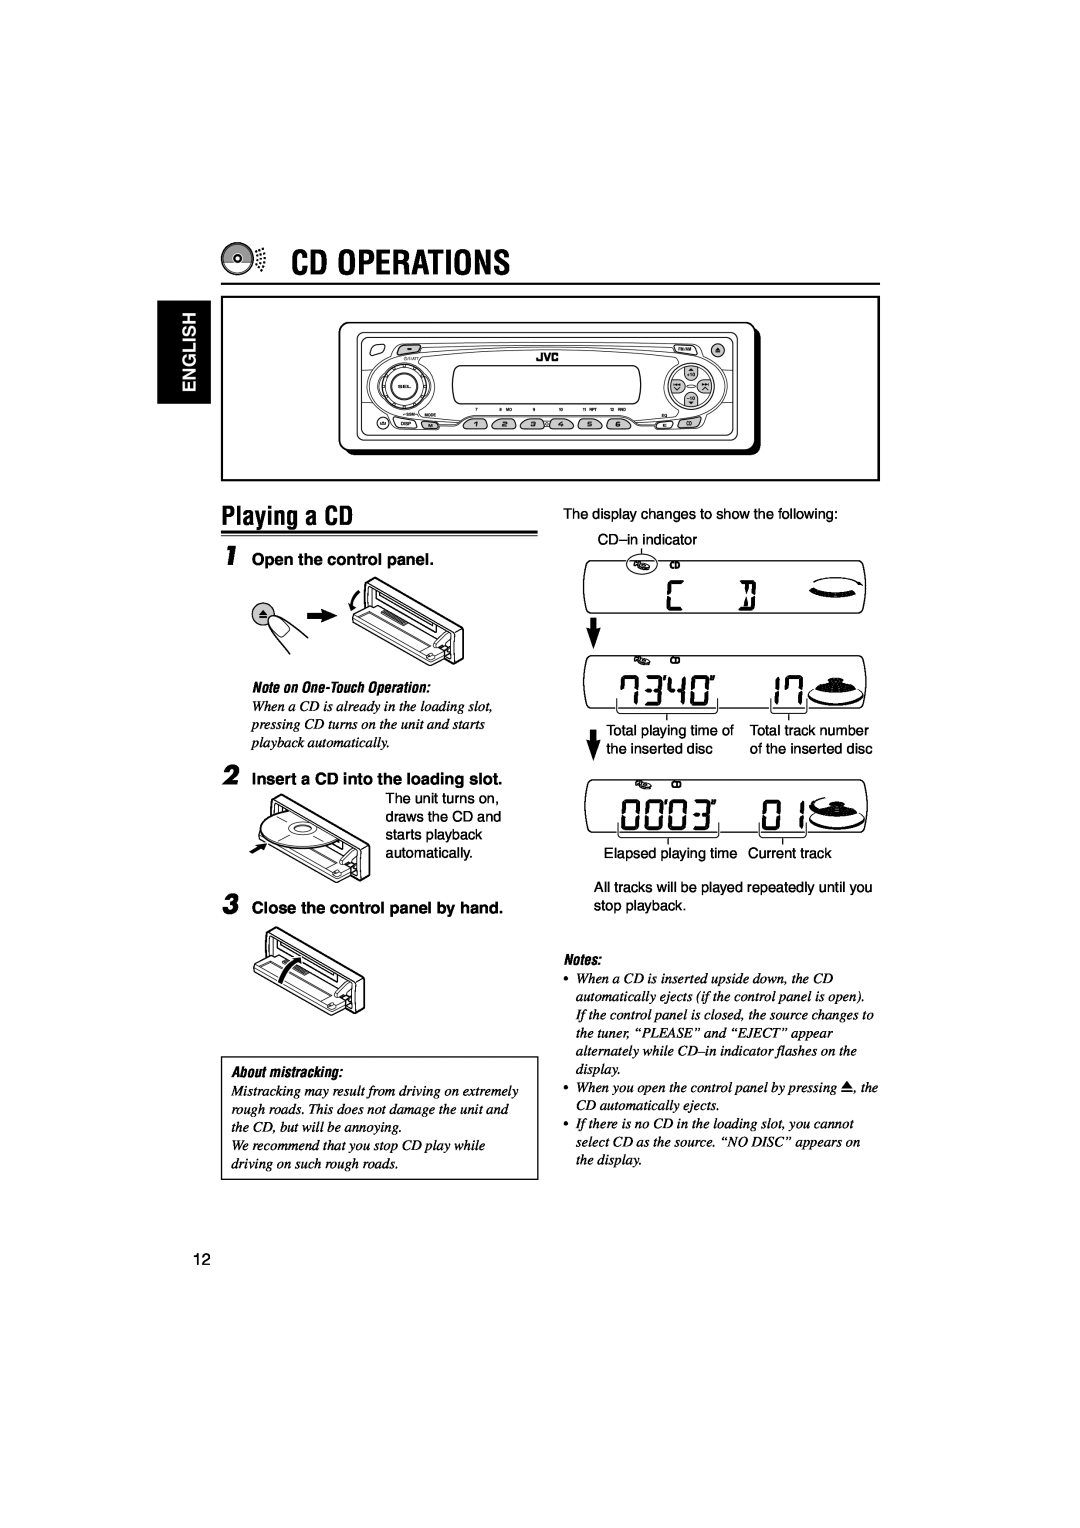 JVC KD-S795 manual Cd Operations, Playing a CD, English, Open the control panel, Insert a CD into the loading slot 